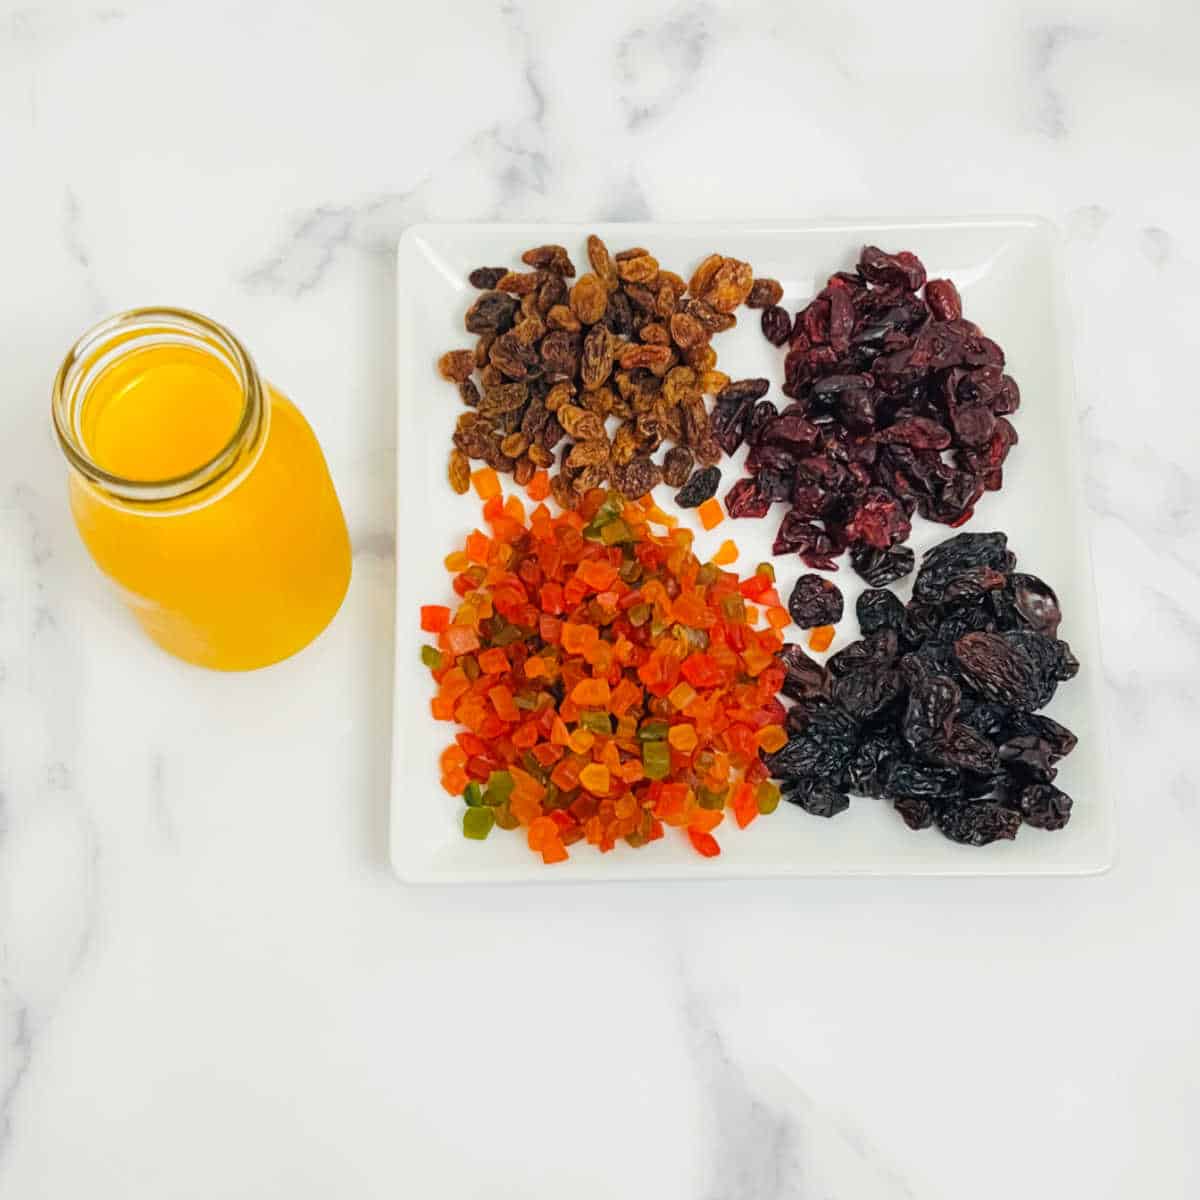 dried nuts used for soaking in the plum cake laid out on a white cutting board next to a jar of orange juice.